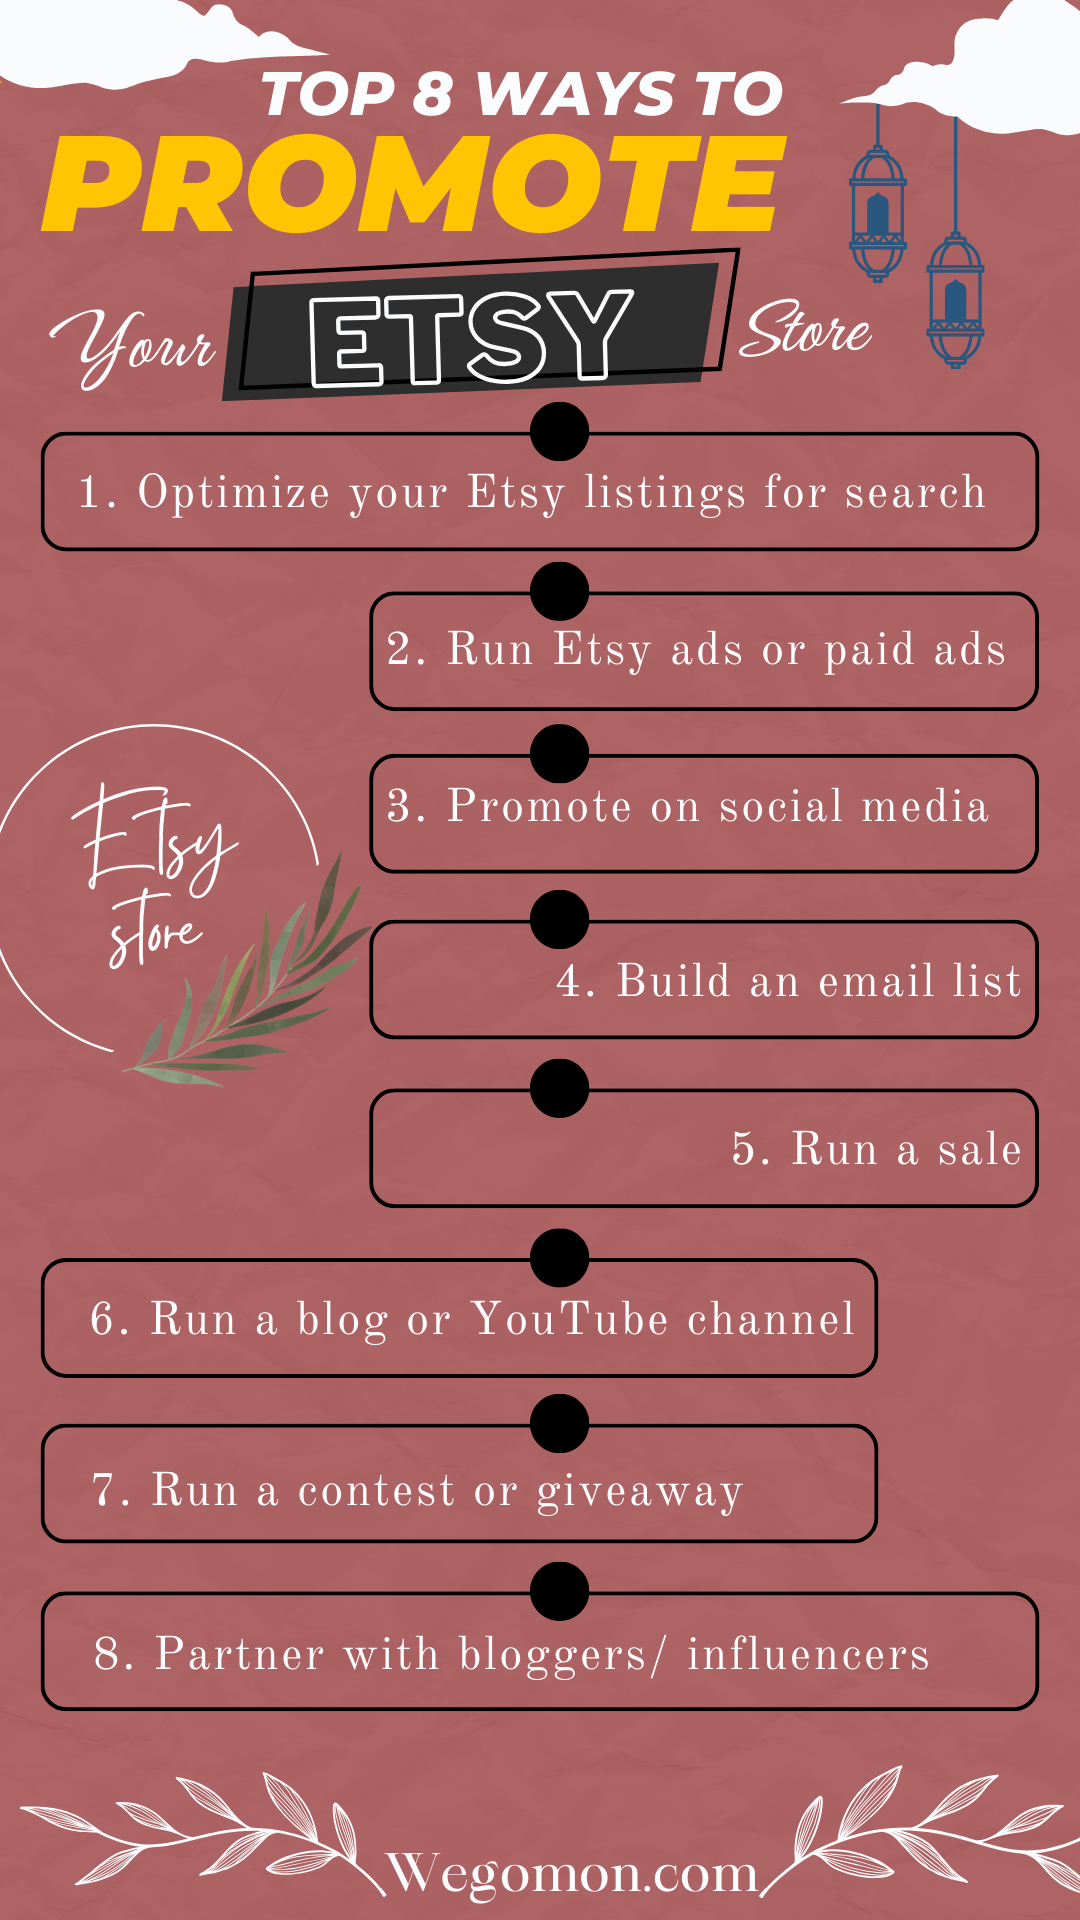 Top 8 Ways to Promote Your Etsy Store